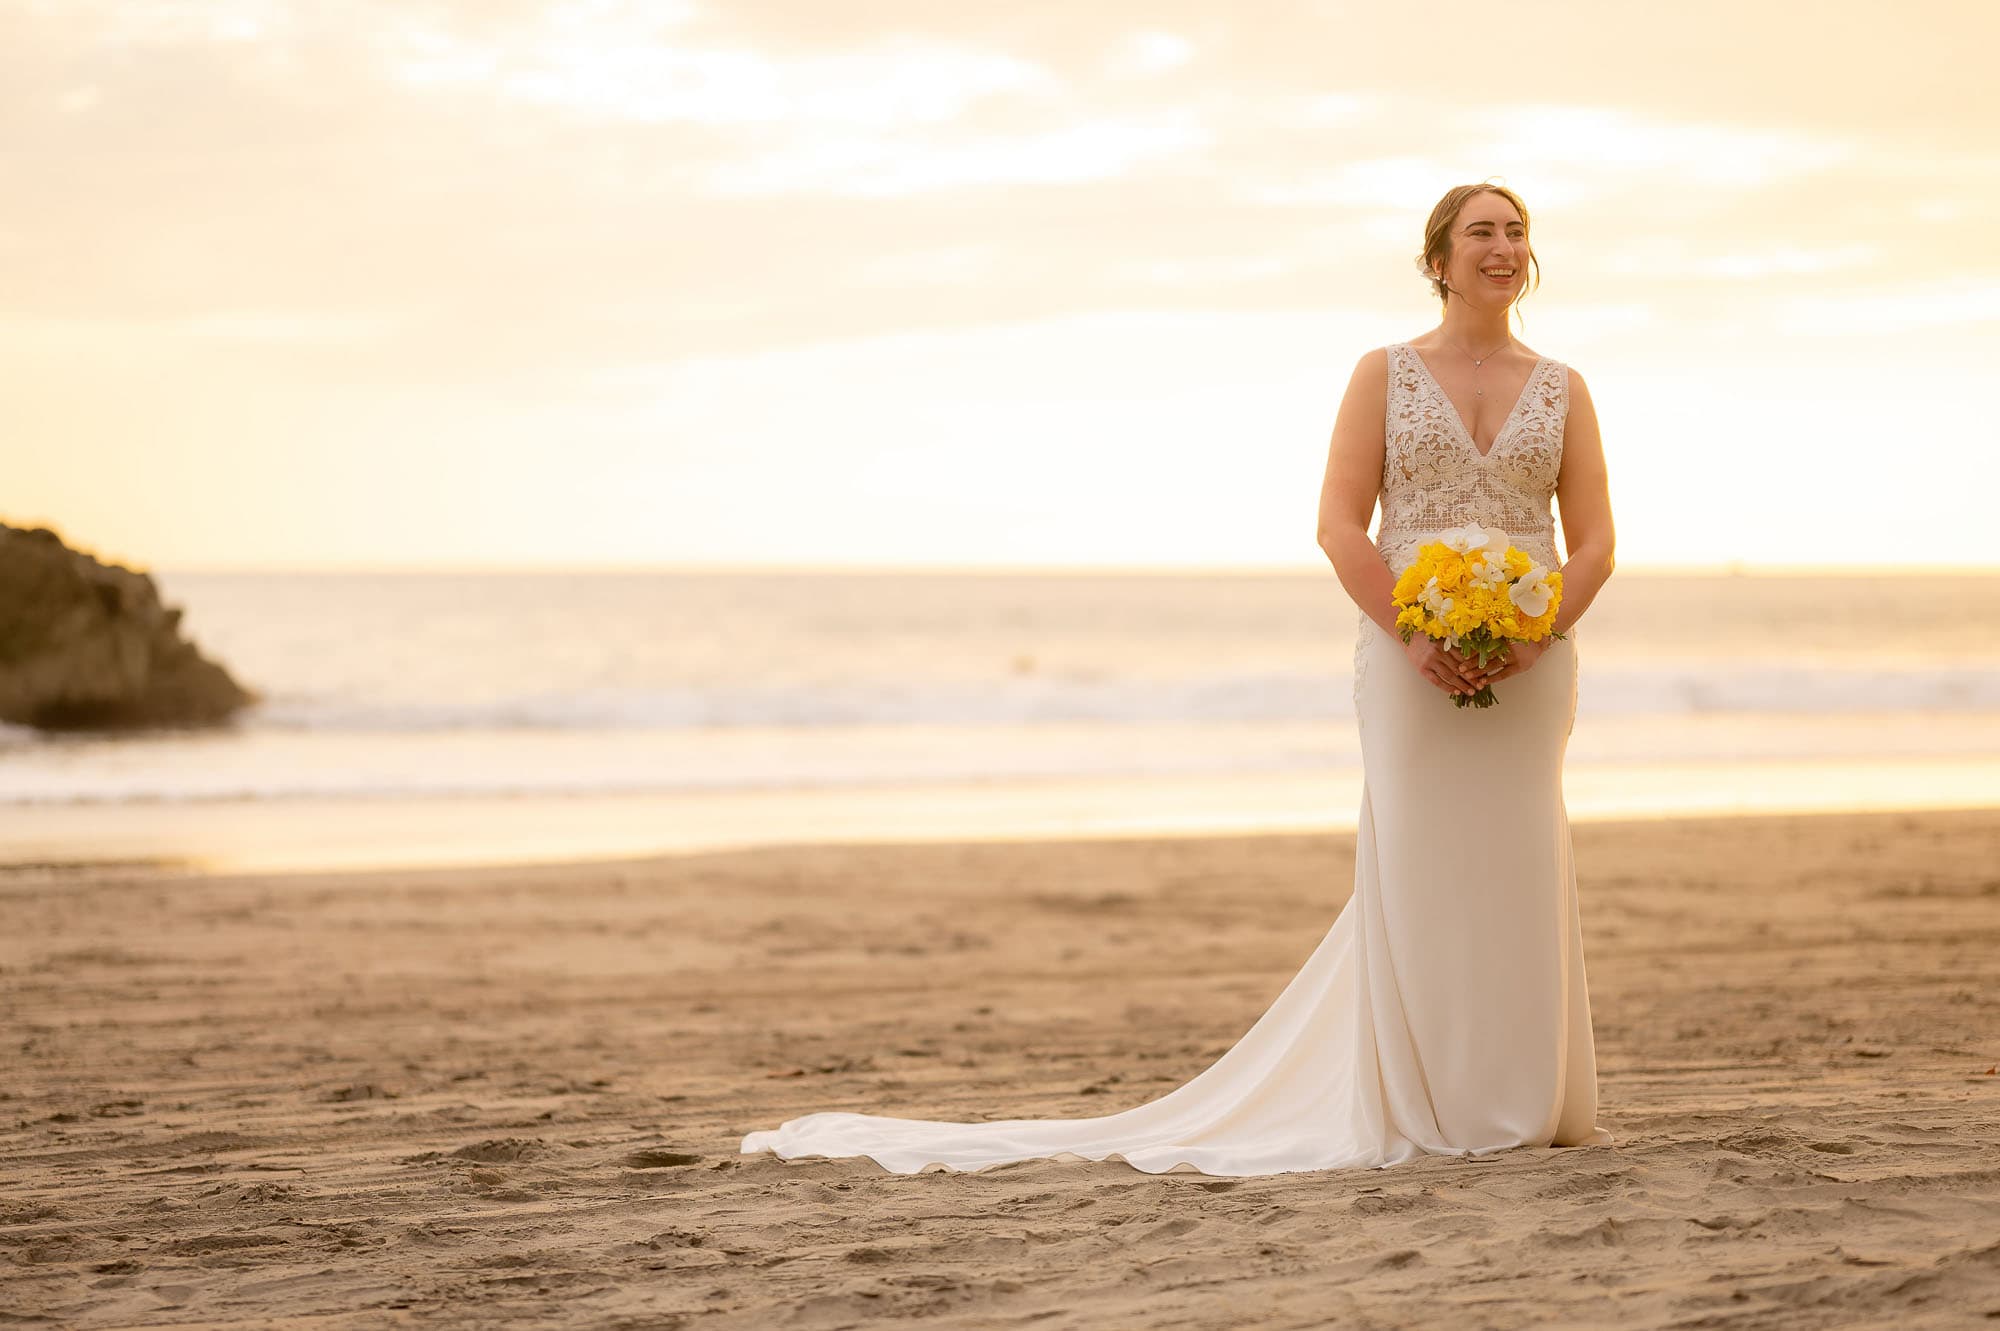 Spectacular shot of the bride at her wedding by the sea